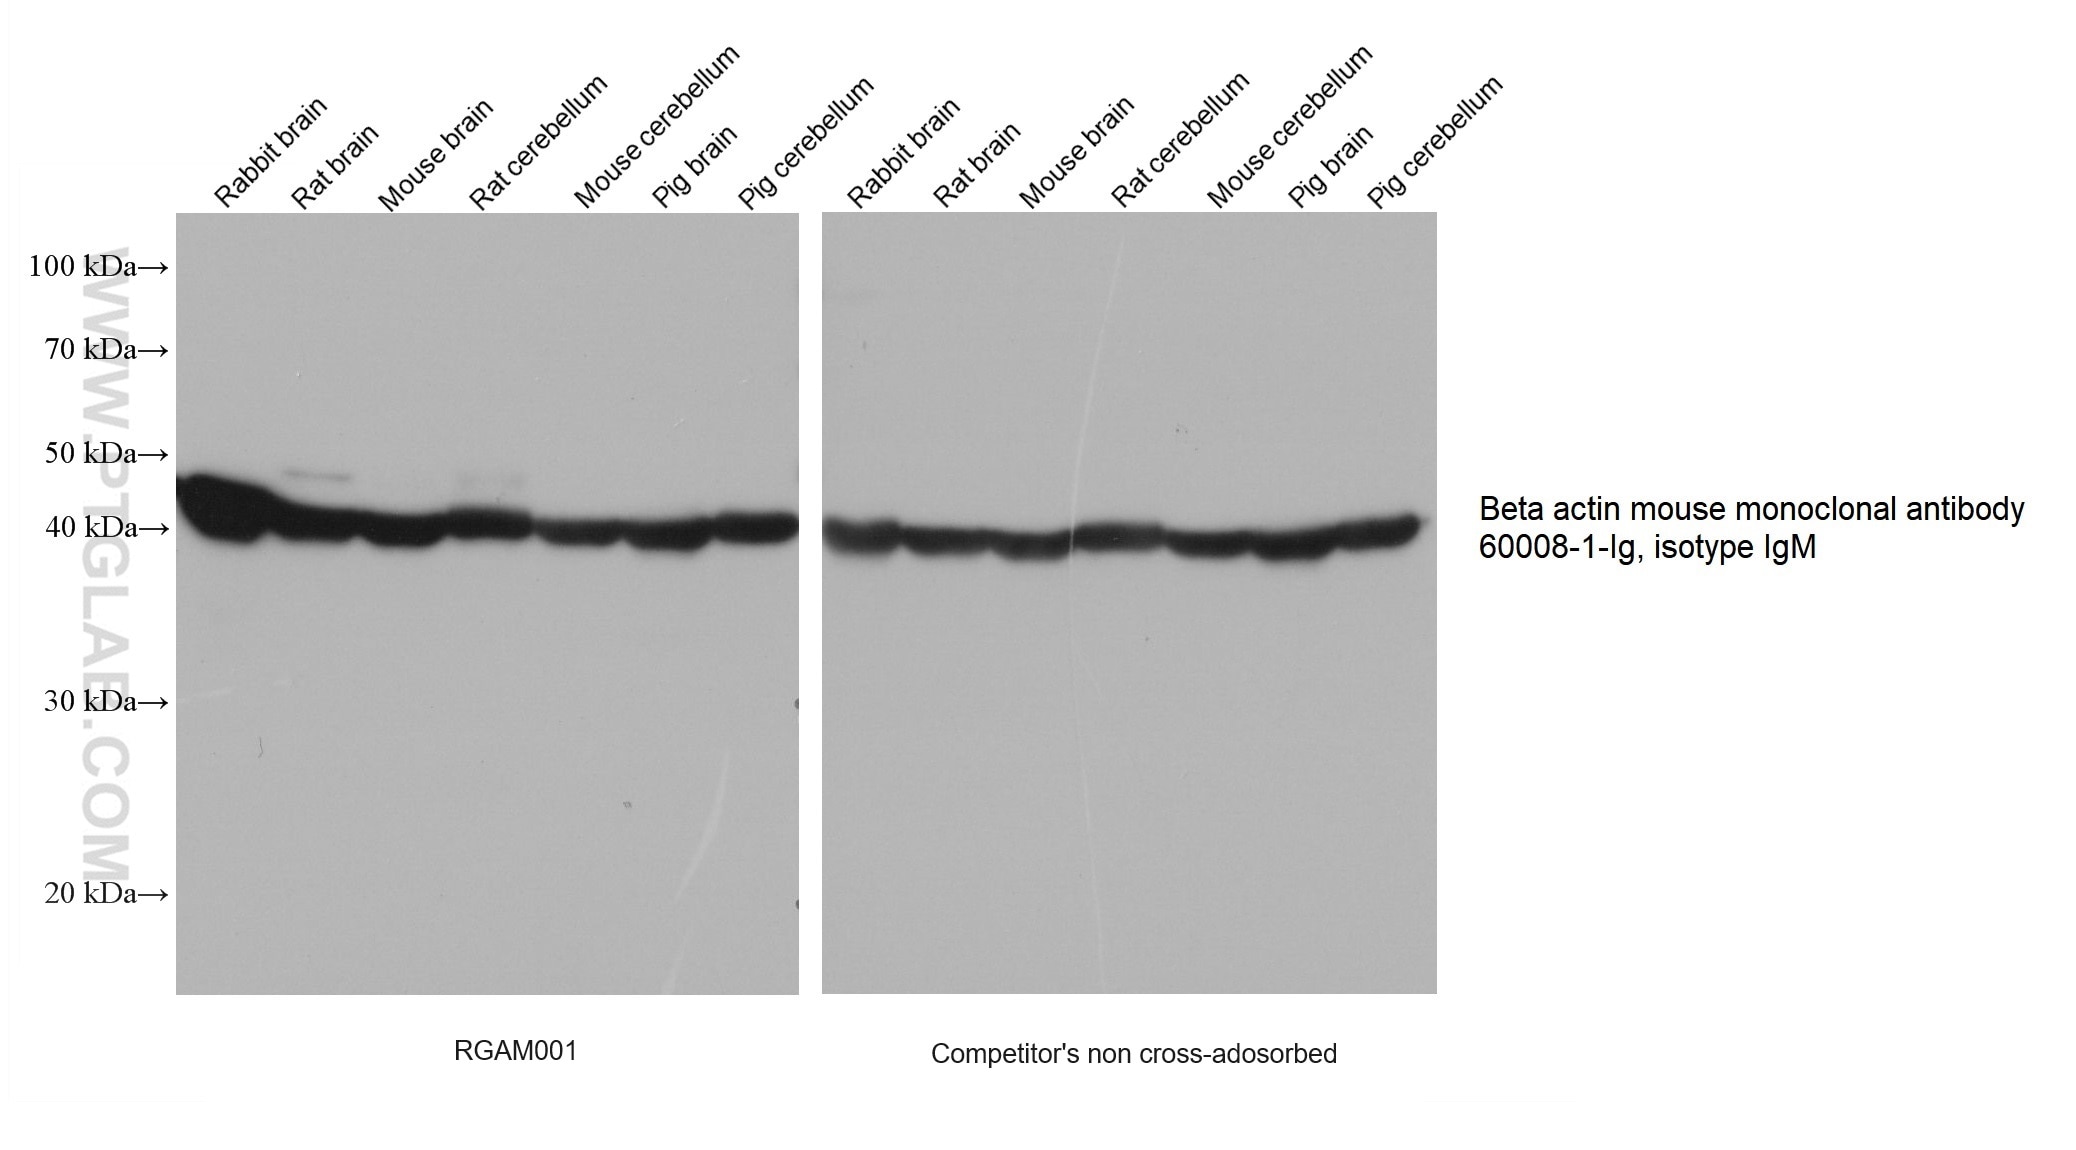 Various lysates were subjected to SDS-PAGE followed by western blot with Beta actin mouse monoclonal antibody (60008-1-Ig, isotype IgM) at dilution of 1:50000.  RGAM001 (left) and competitor’s non cross-adsorbed HRP-Goat anti-mouse (H+L) secondary antibody (right) were both used at 0.05μg/mL for detection. 